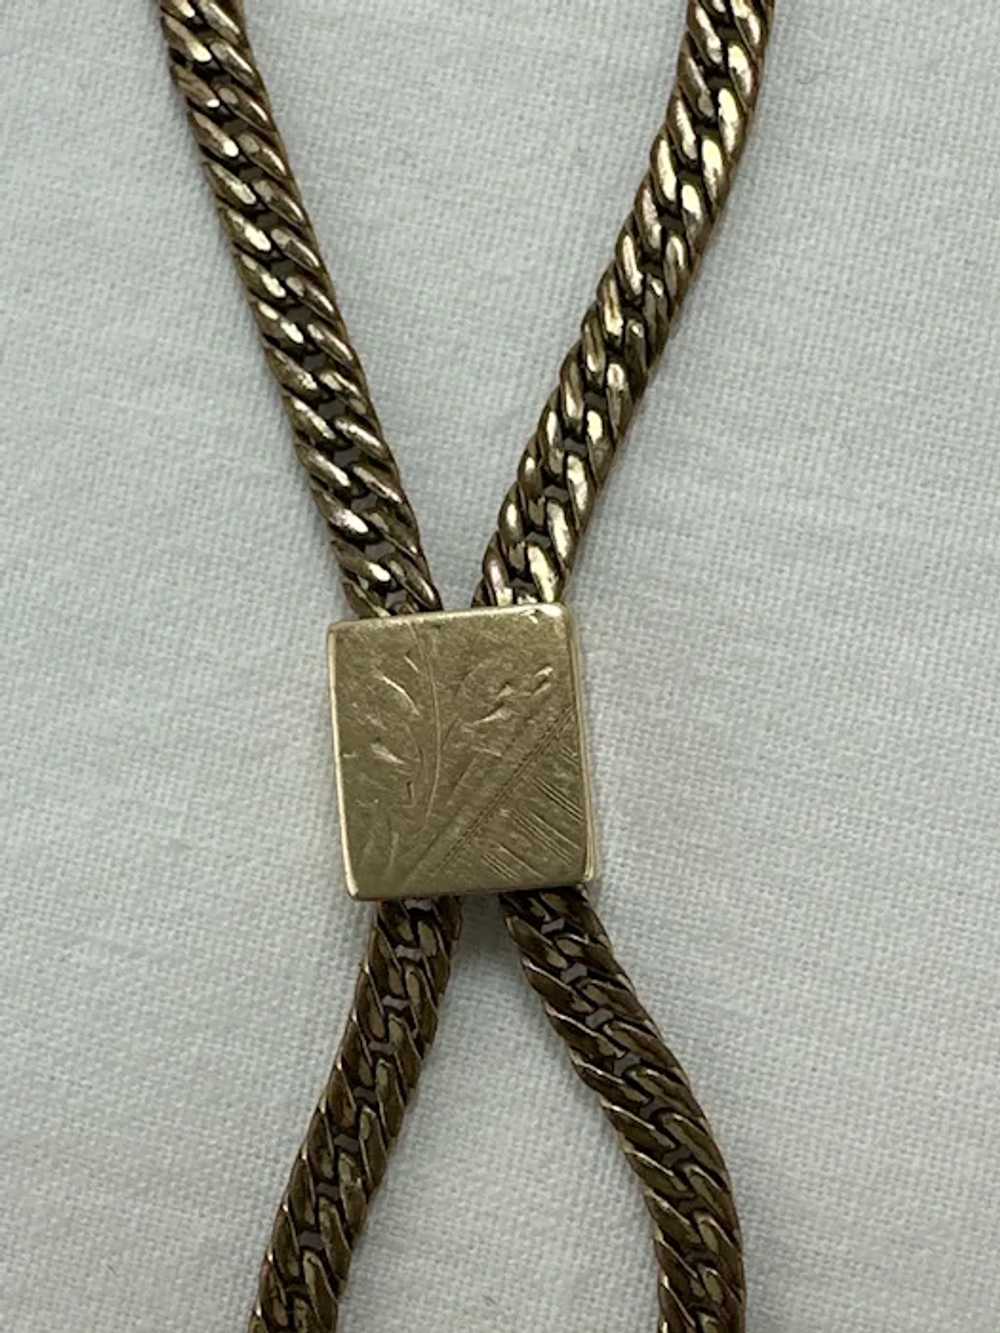 Victorian Double Chain Slide Watch Chain - image 4